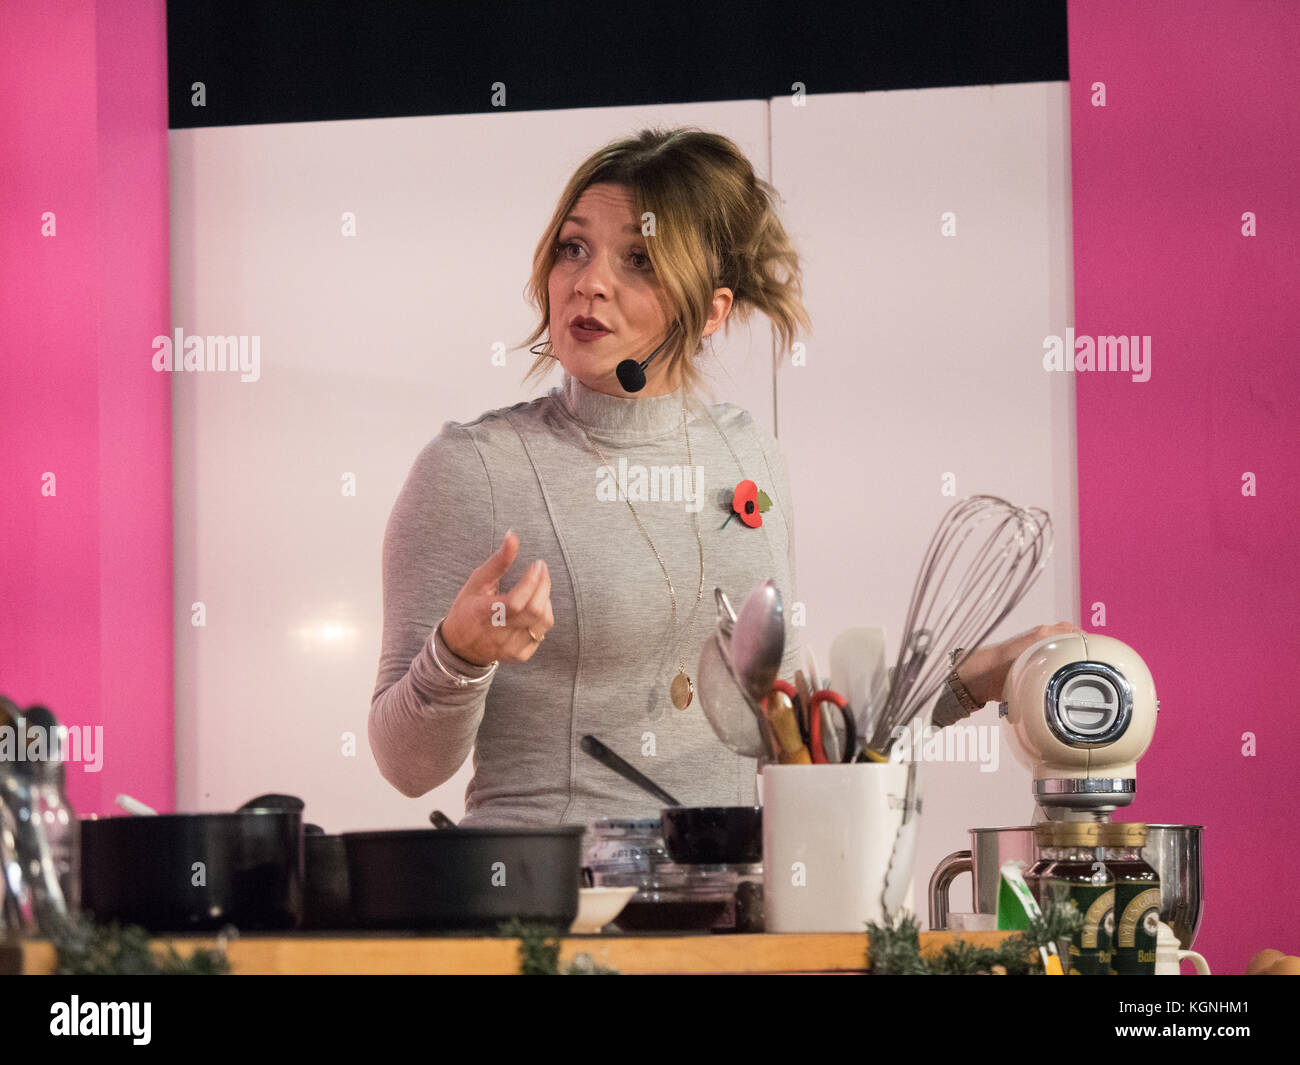 Manchester, UK. 9th Nov, 2017. Candice Brown, the winner of The Great British bake Off performing a baking demonstration at the Cake and Bake show in Manchester. She has just been announced as a contestant on the new series of dancing on Ice. Credit: Chris Rogers/Alamy Live News Stock Photo